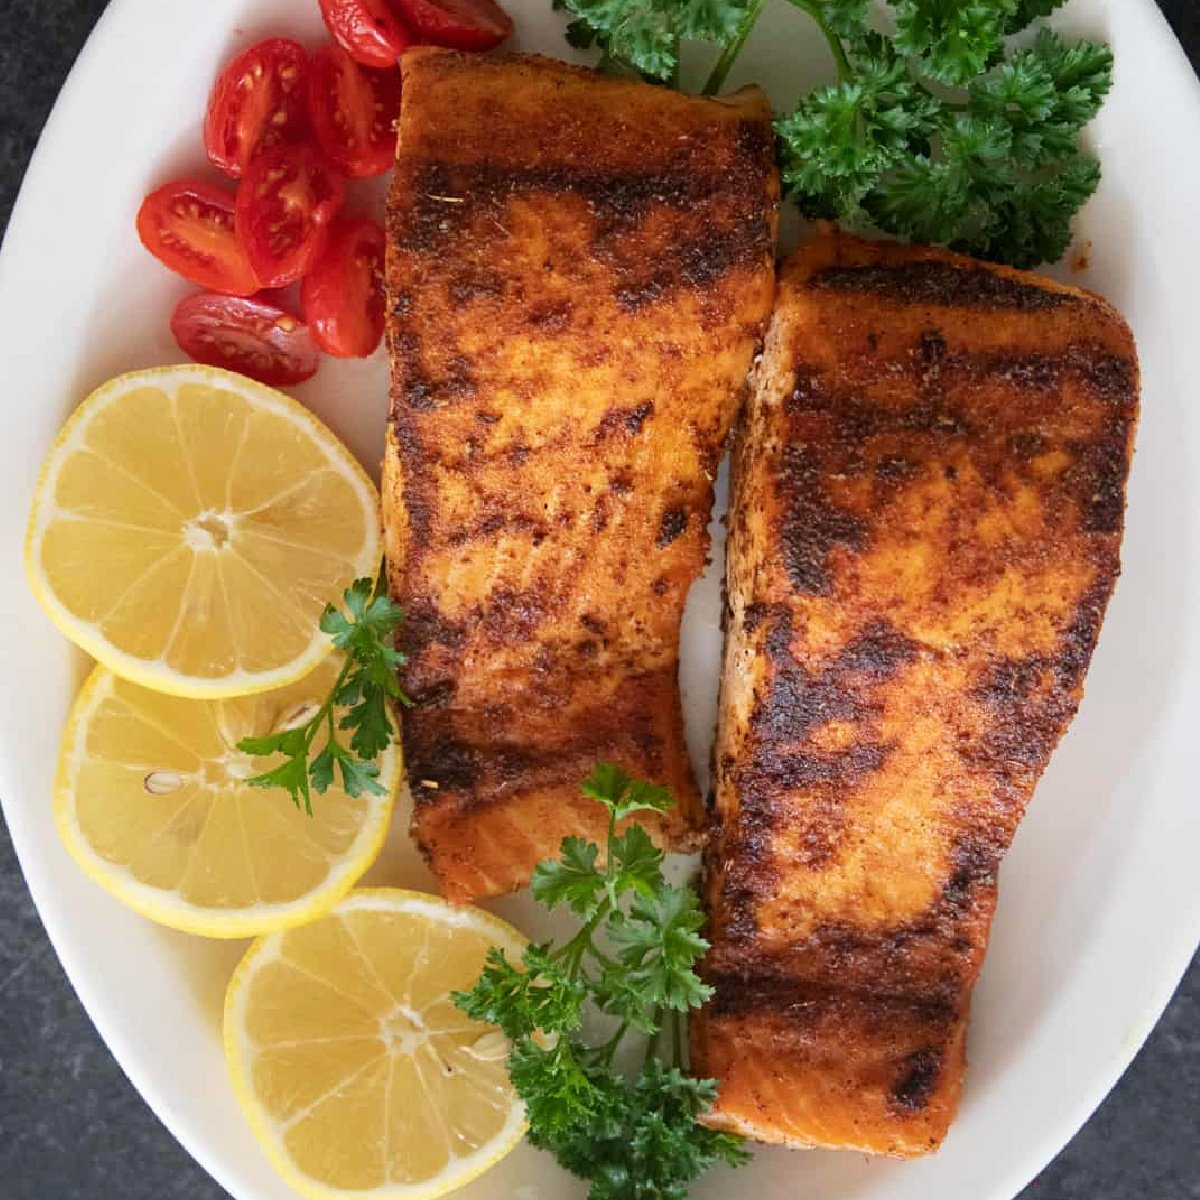 Make the best blackened salmon recipe in 20 minutes! For this dish, salmon fillets are coated with blackening seasoning and seared until flaky and tender. Turn this into a tasty salmon dinner with salad, rice or potatoes.
